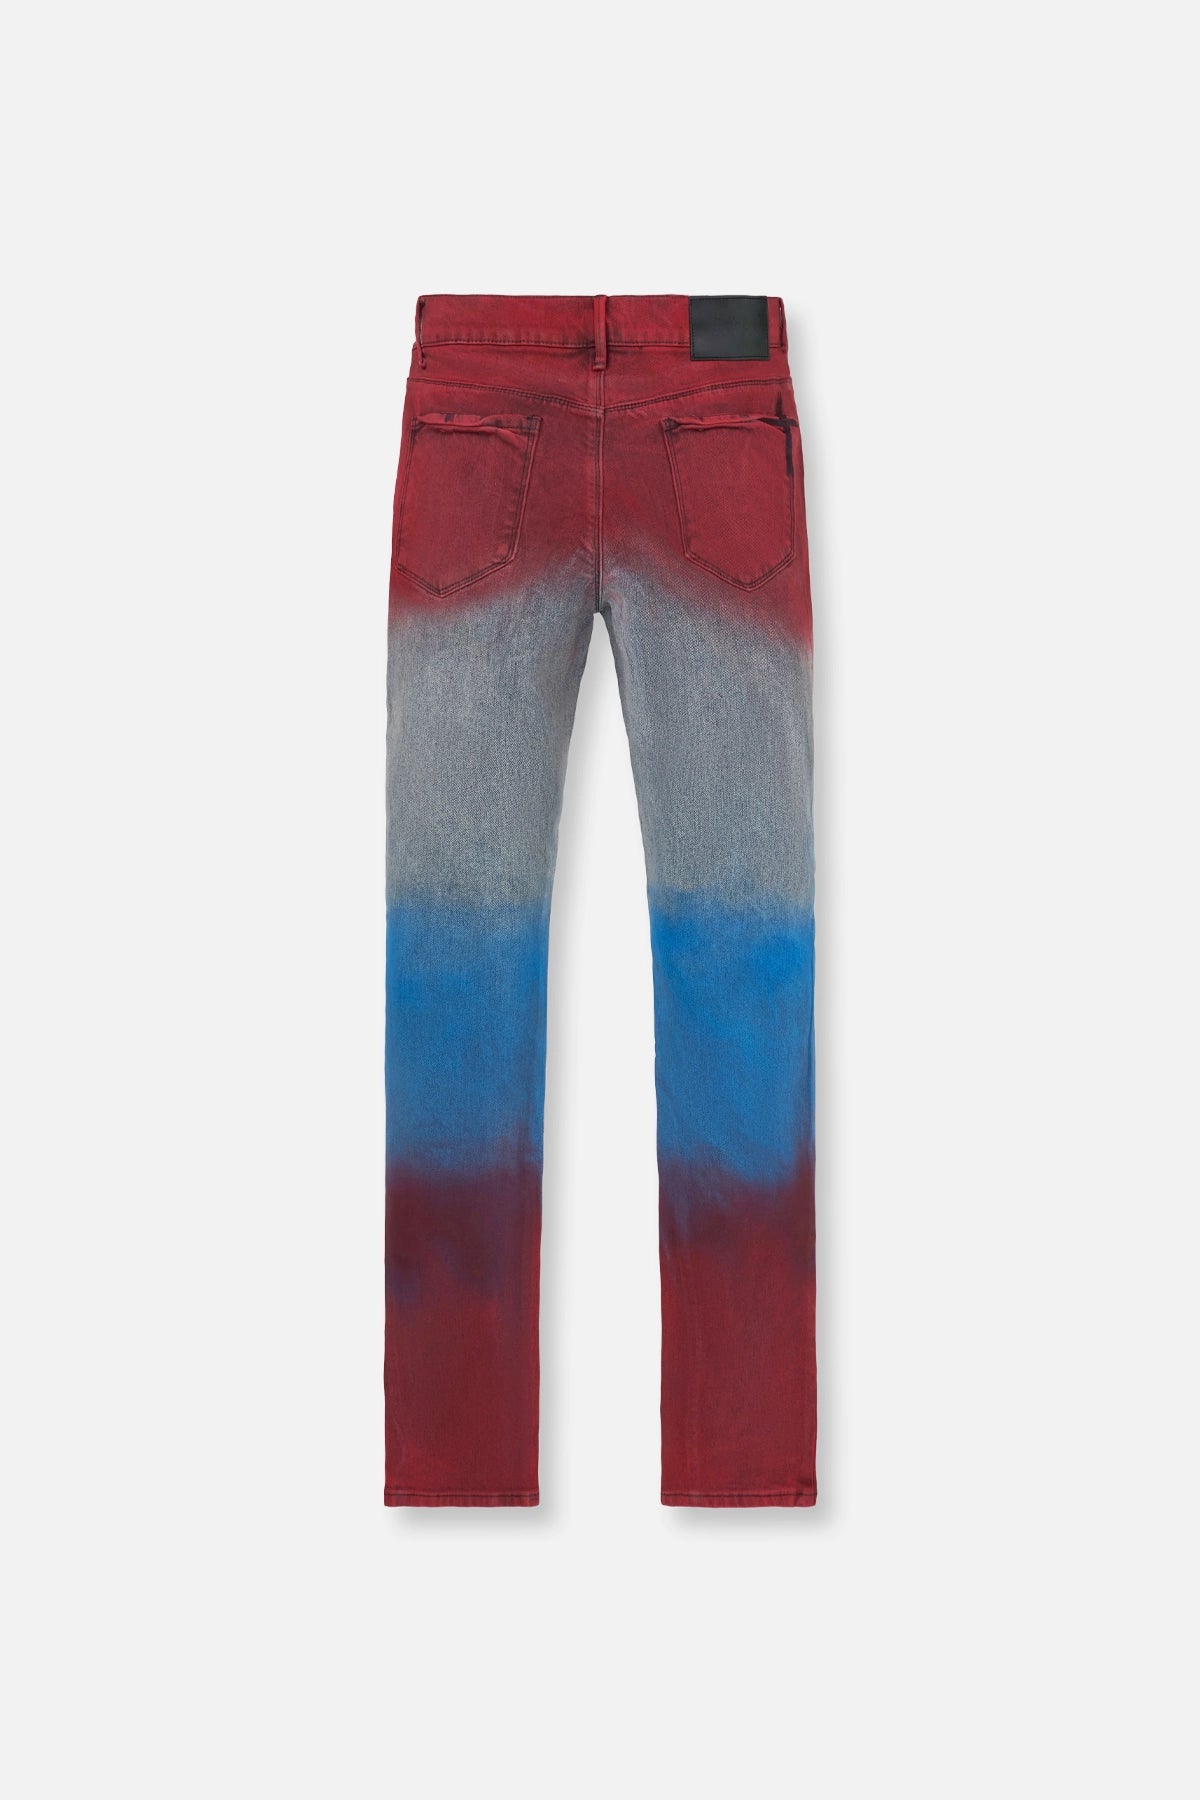 BRYANT | COATED RED BLUE OMBRE